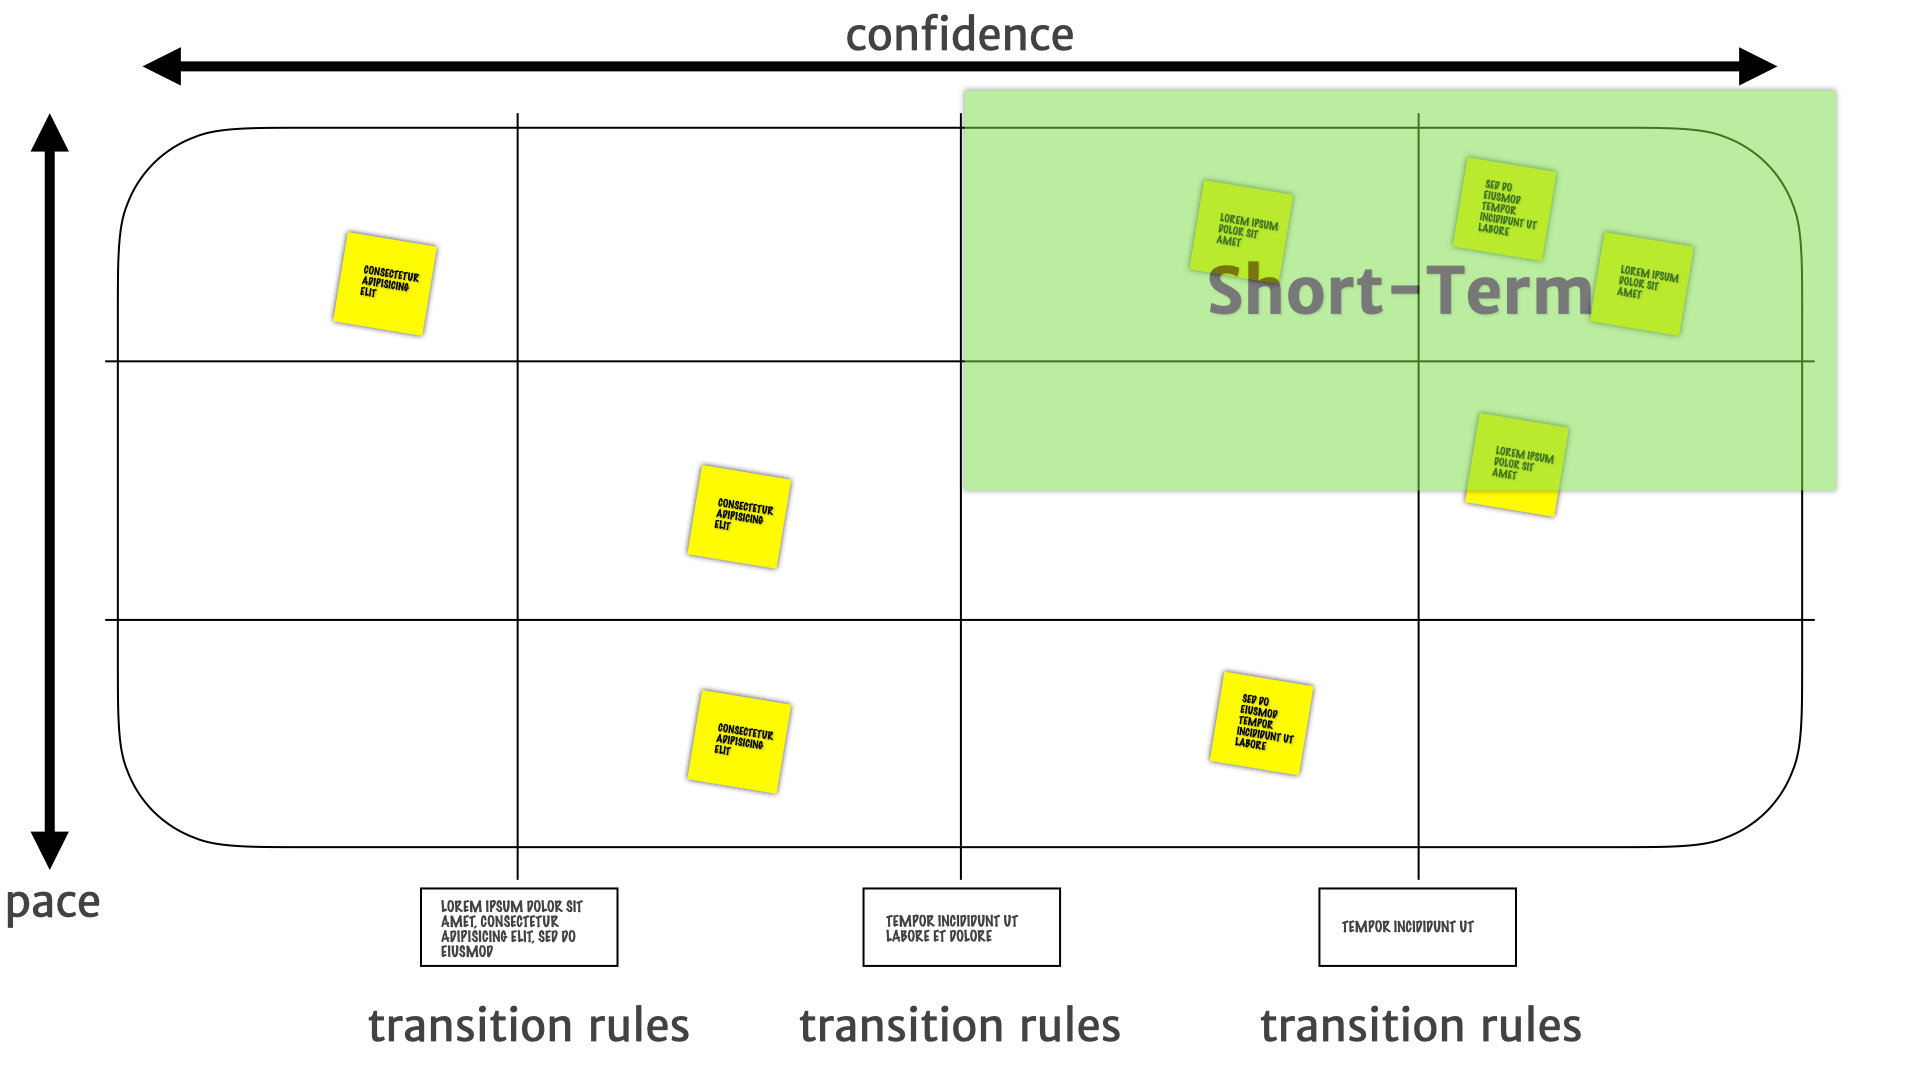 A pace layer map with the top-right quadrant highlighted and labelled 'short-term'.